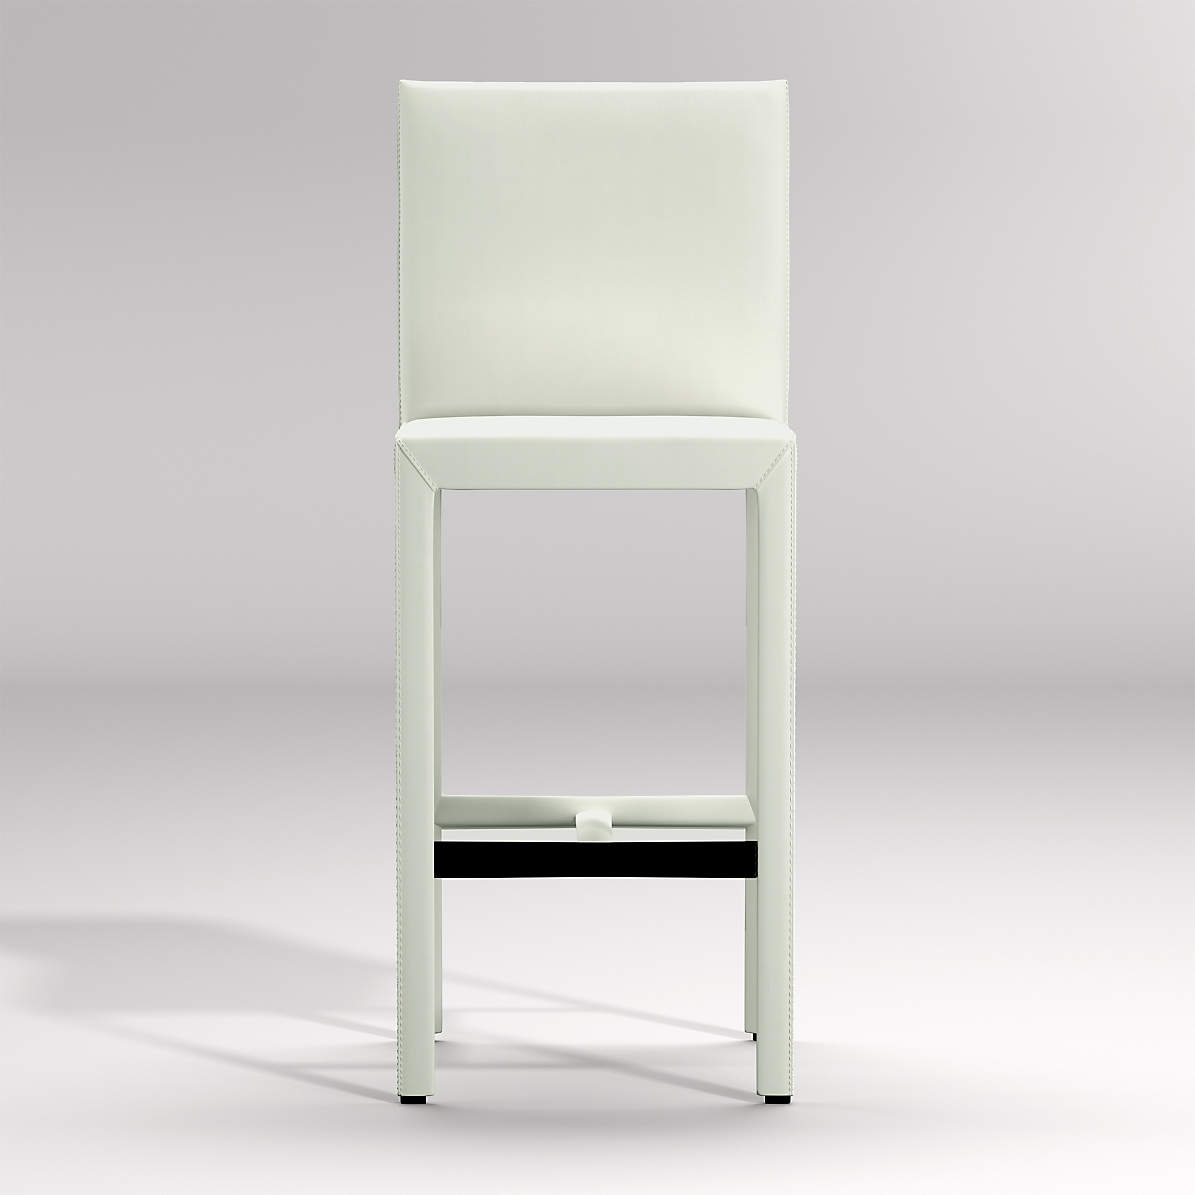 Top Grain Leather Bar Stools Crate, White Leather Bar Stool